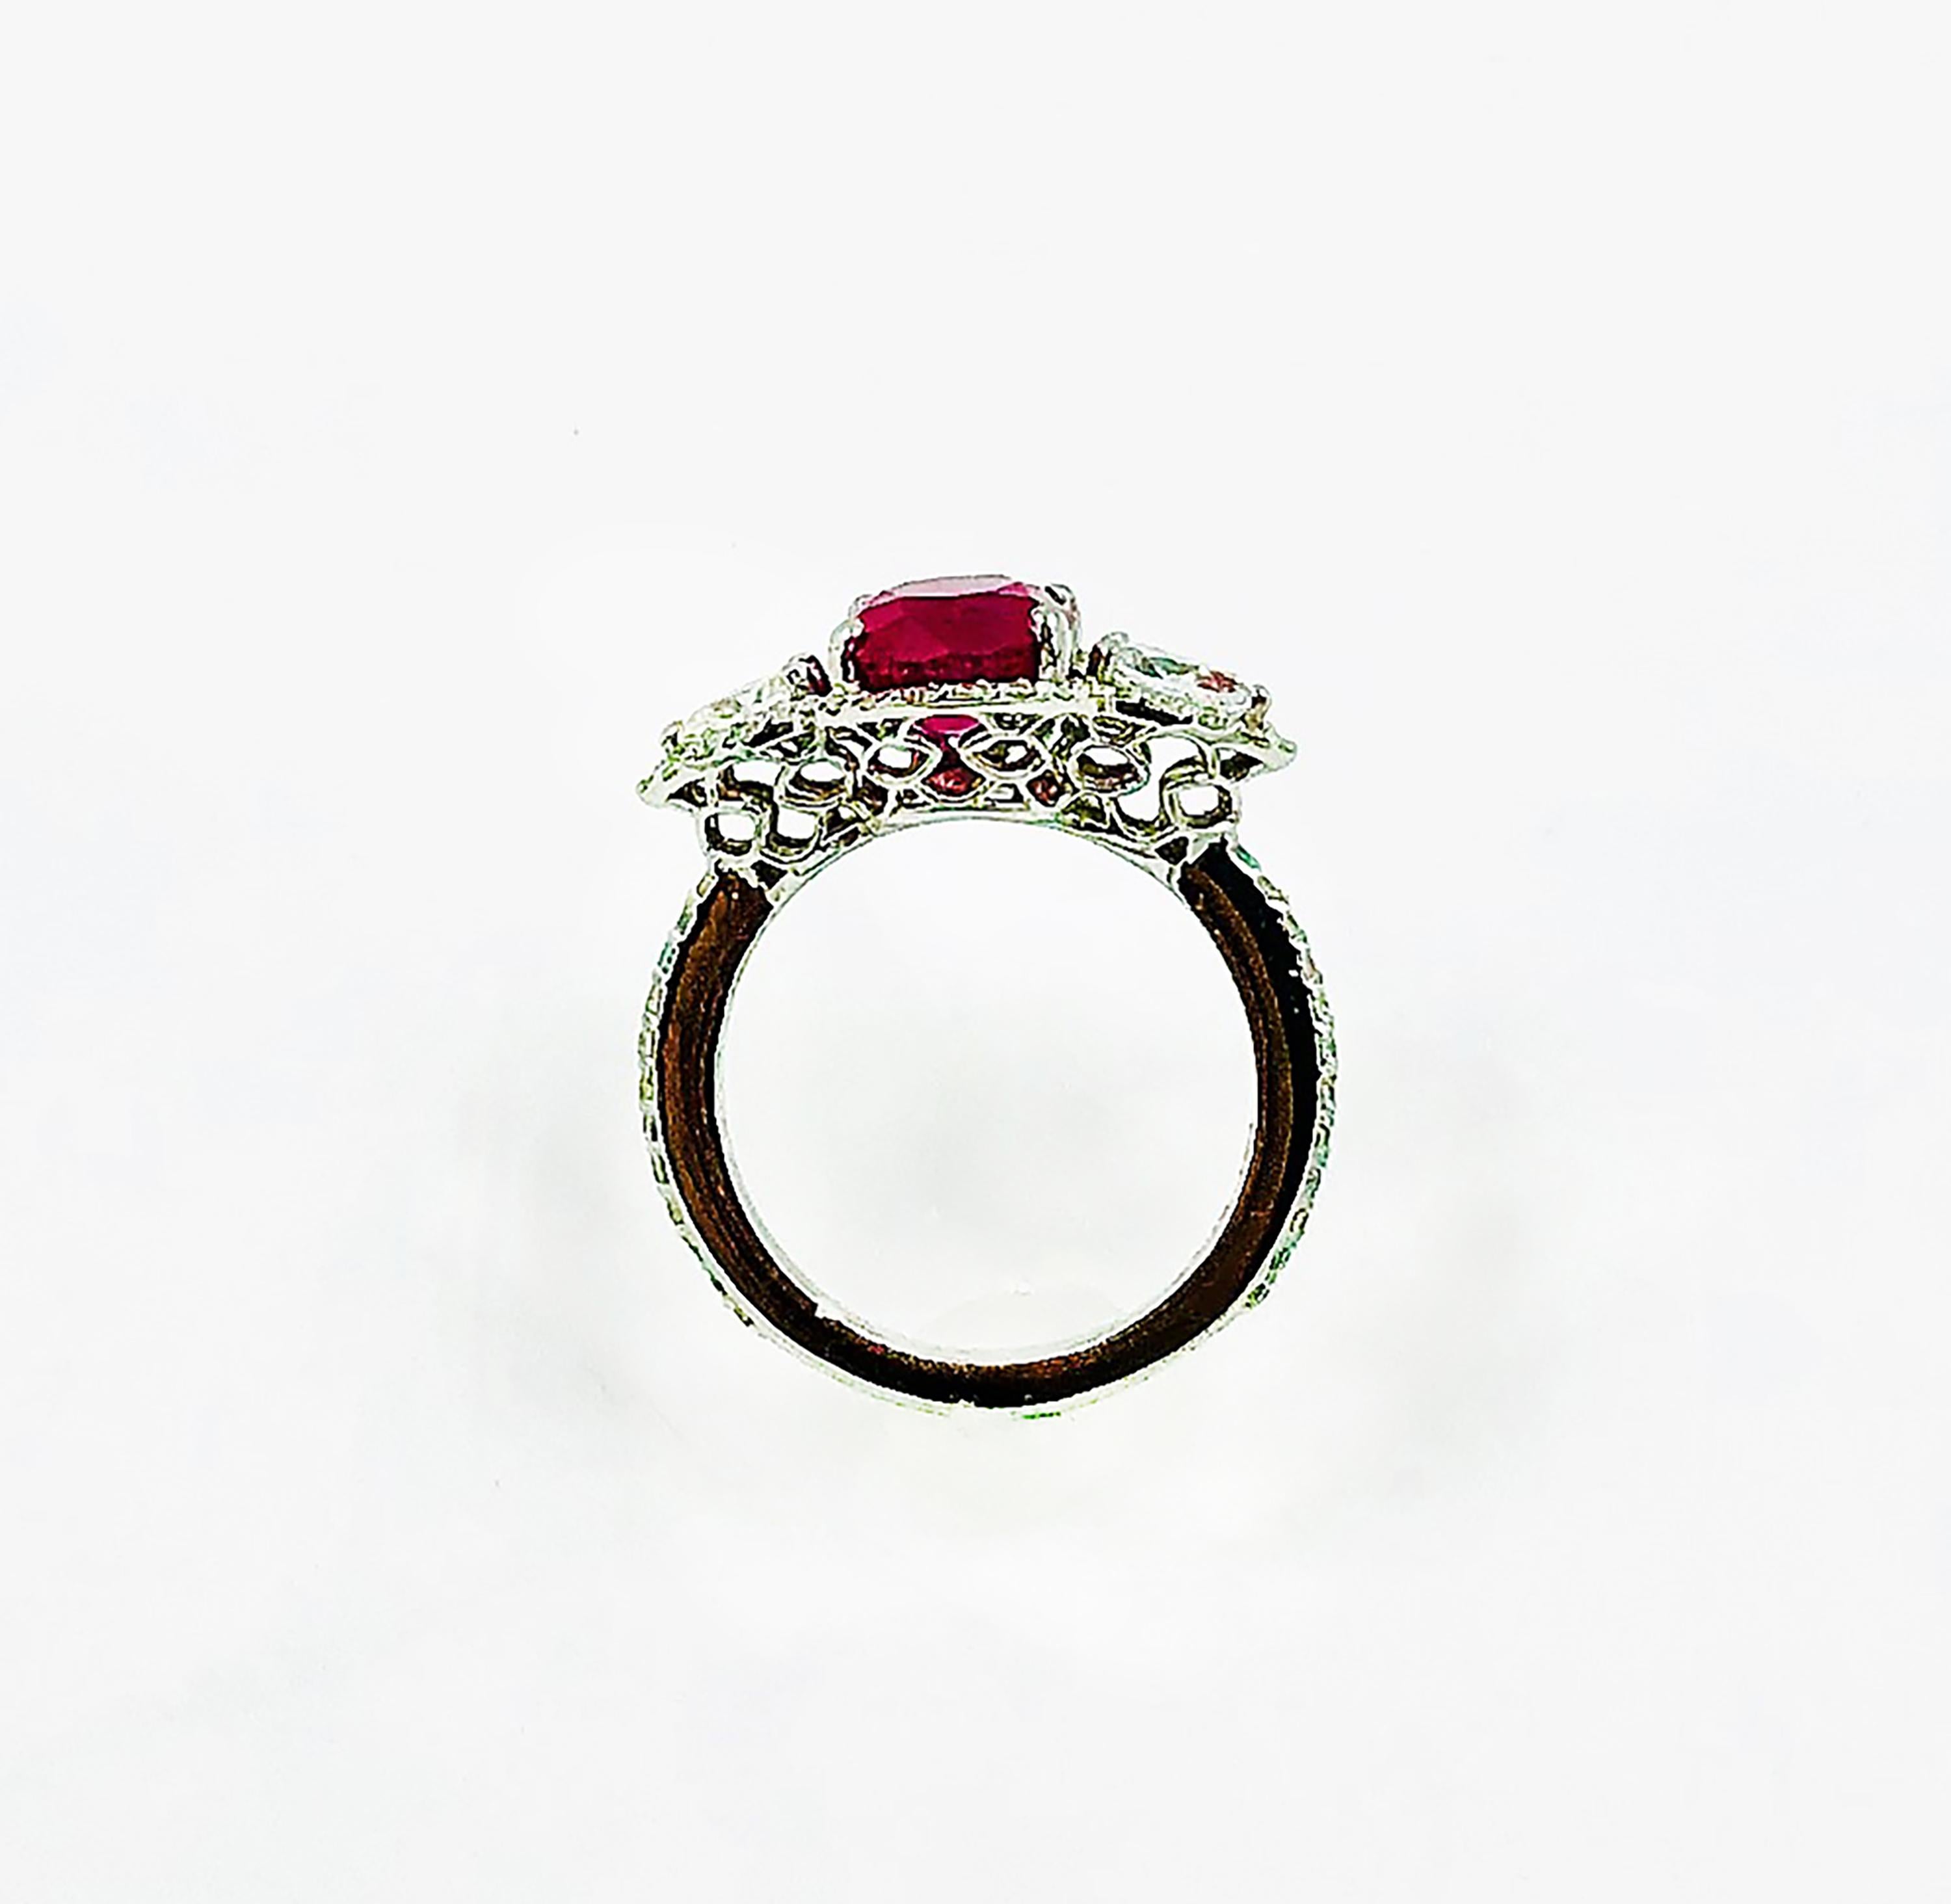 Oval Cut Cabochon Burma Ruby Diamond White Gold Cocktail Ring Weighing 8.85 Carat